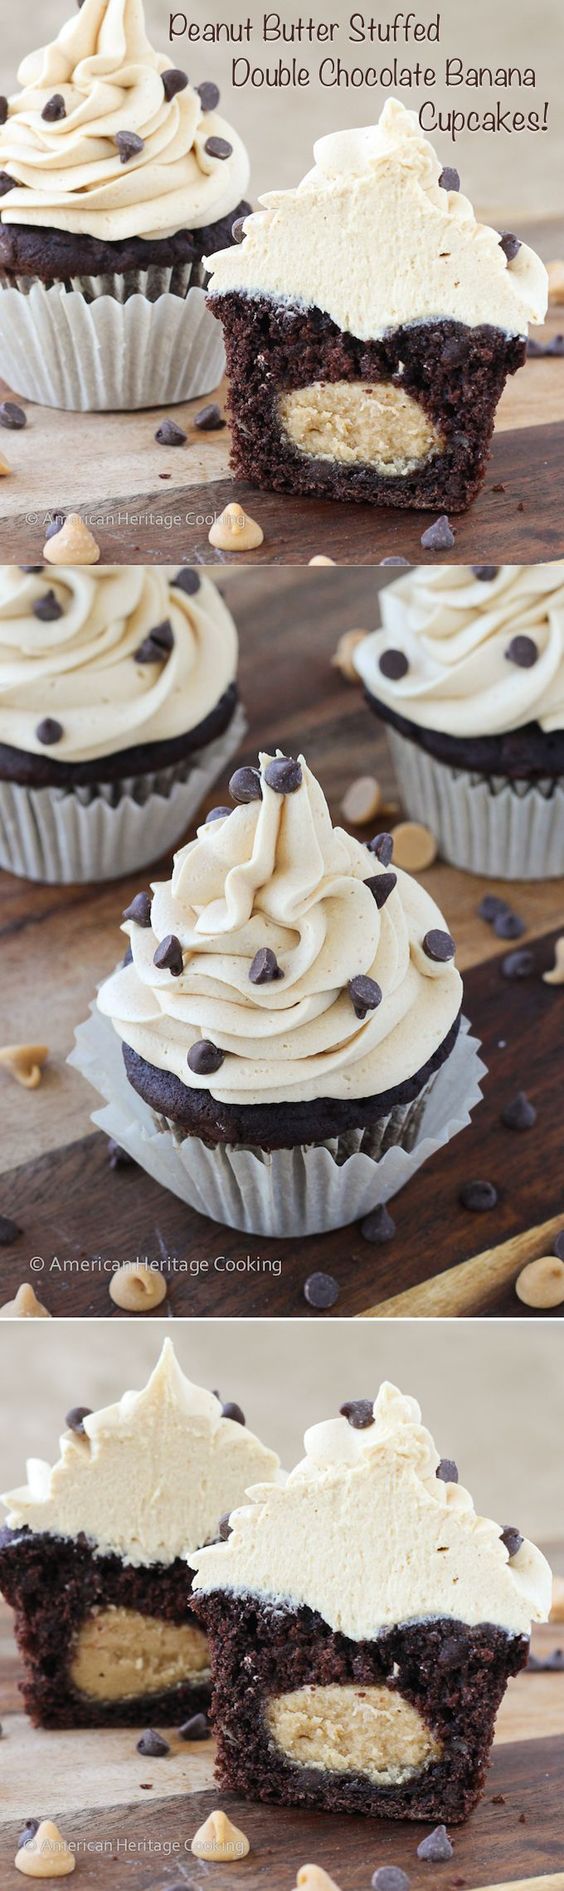 Peanut Butter Banana Cupcakes with Chocolate Frosting